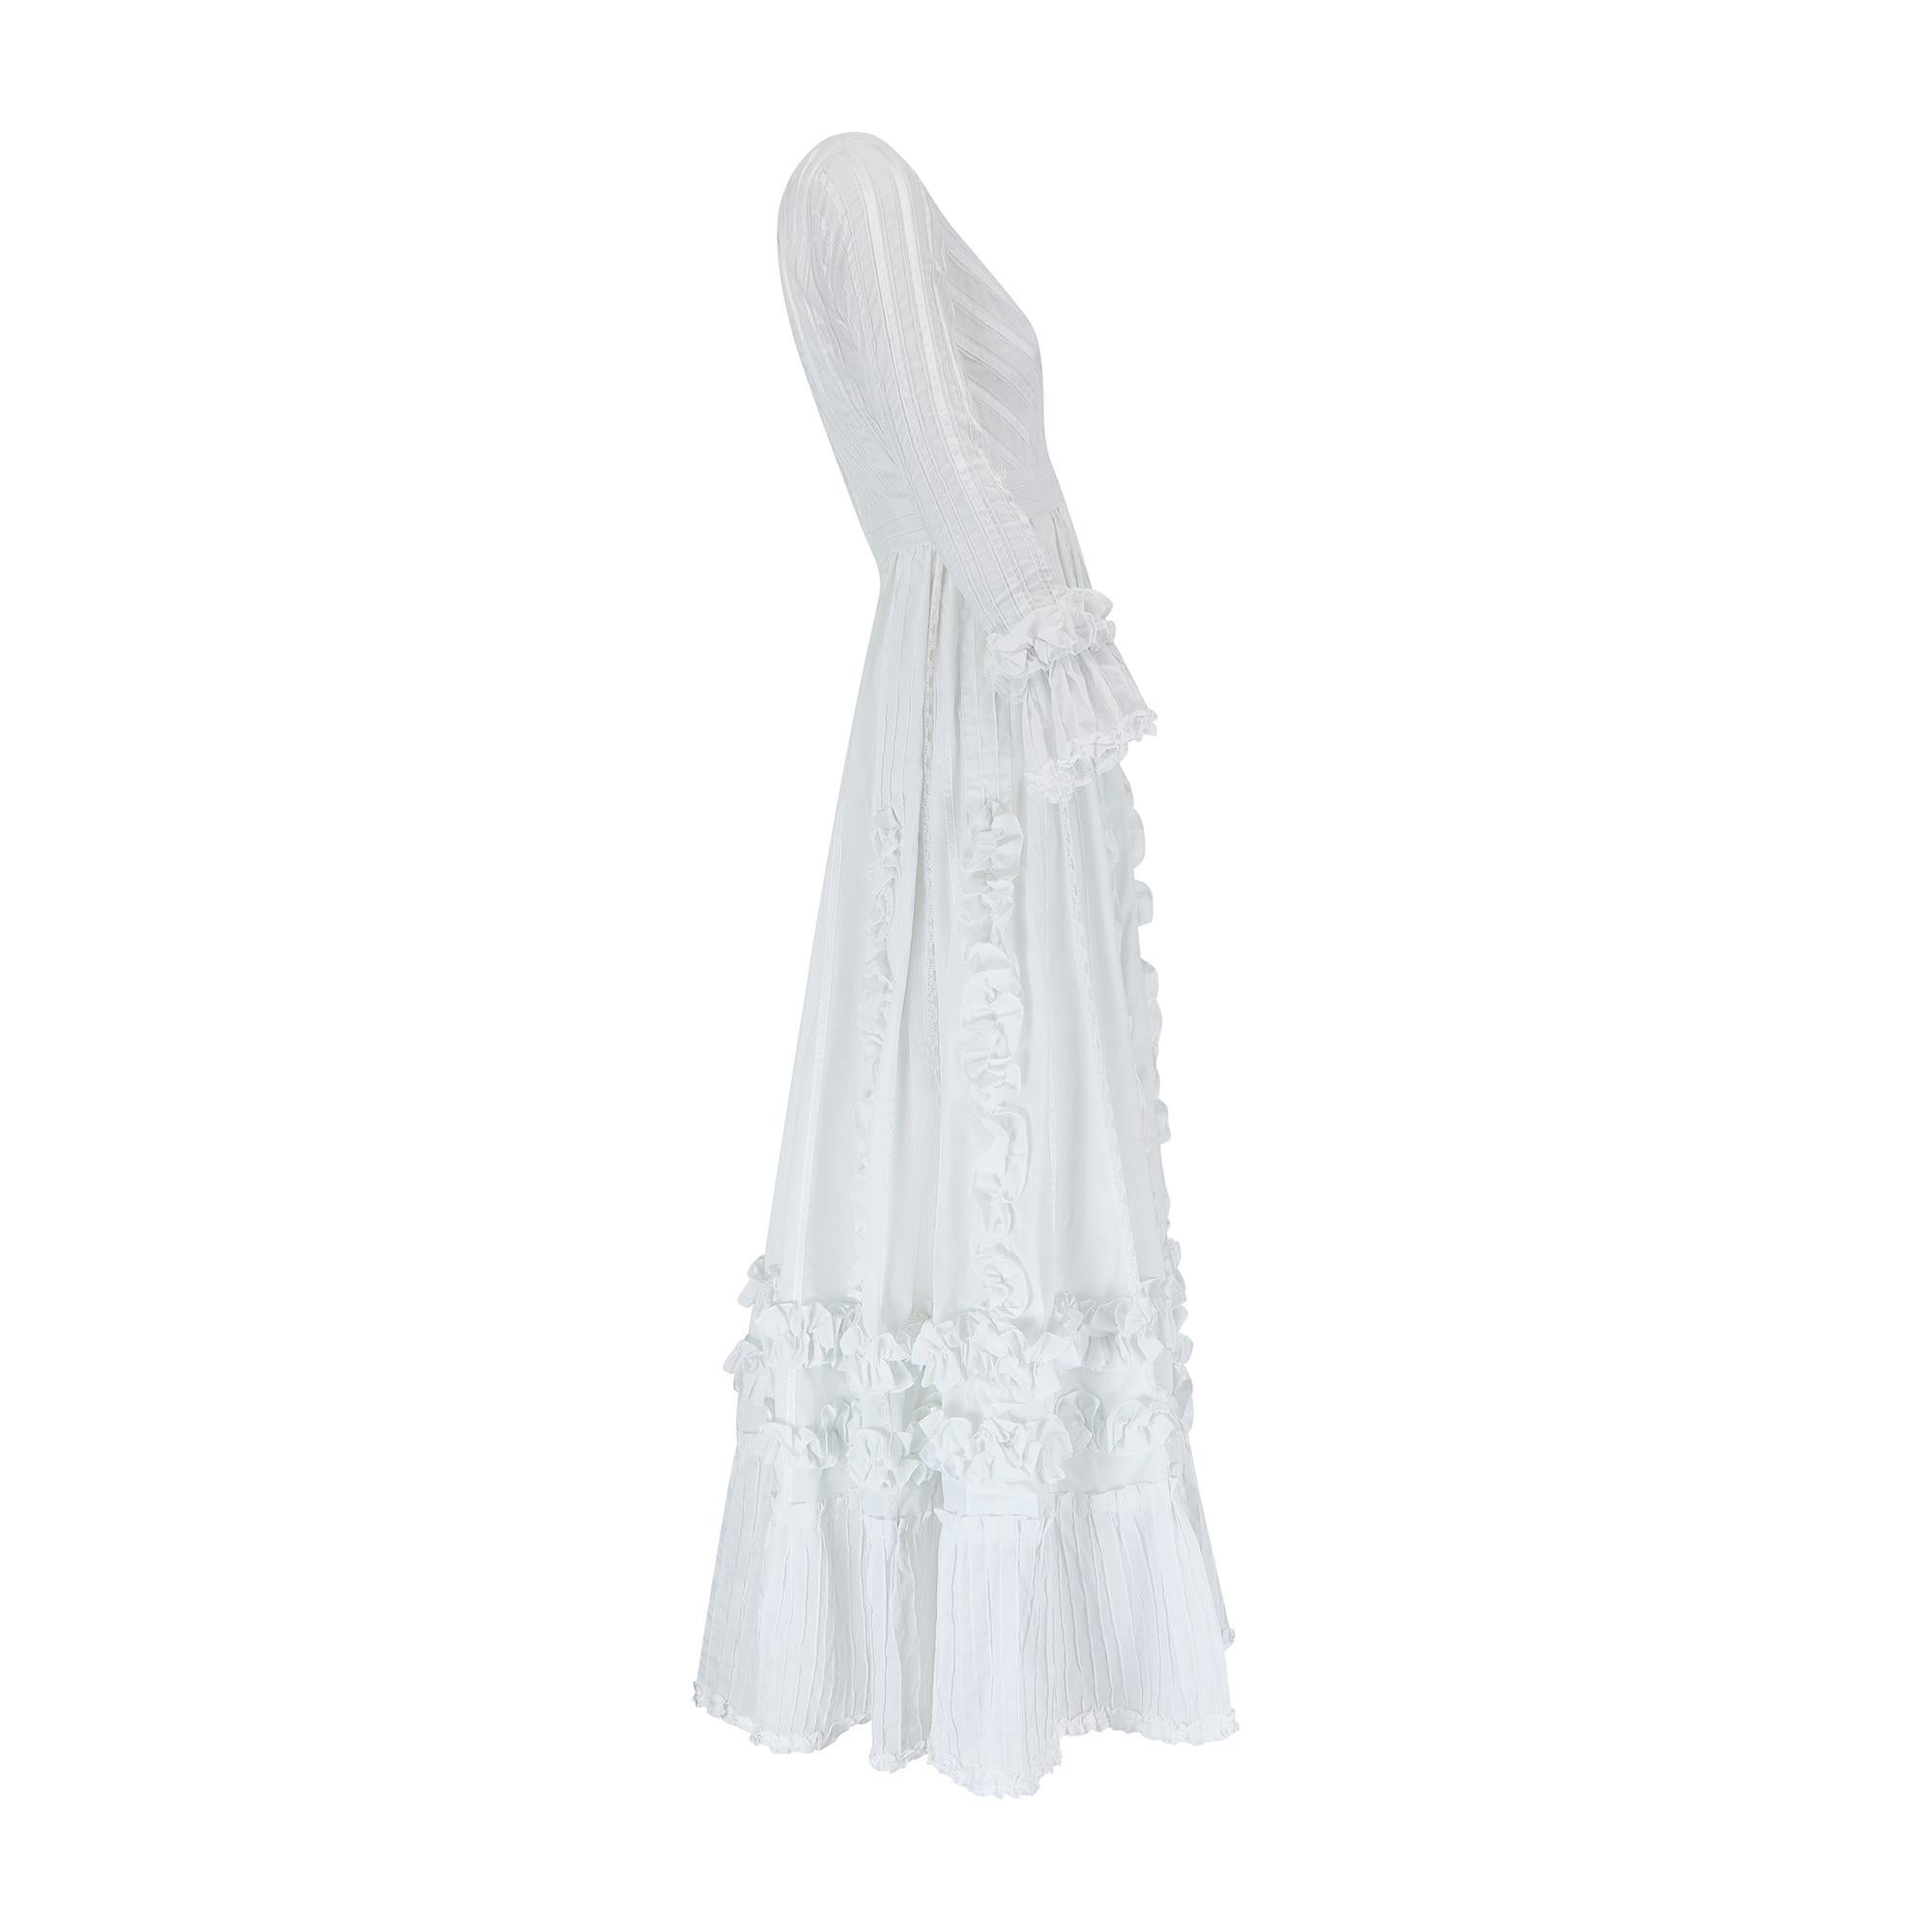 Sublime late 1970s to early 1980s Mexican wedding dress from the legendary Mexicana boutique which was located just off the Kings Road in London. Pleated all over, it is made from bright white cotton which has been intricately pin-tucked all over